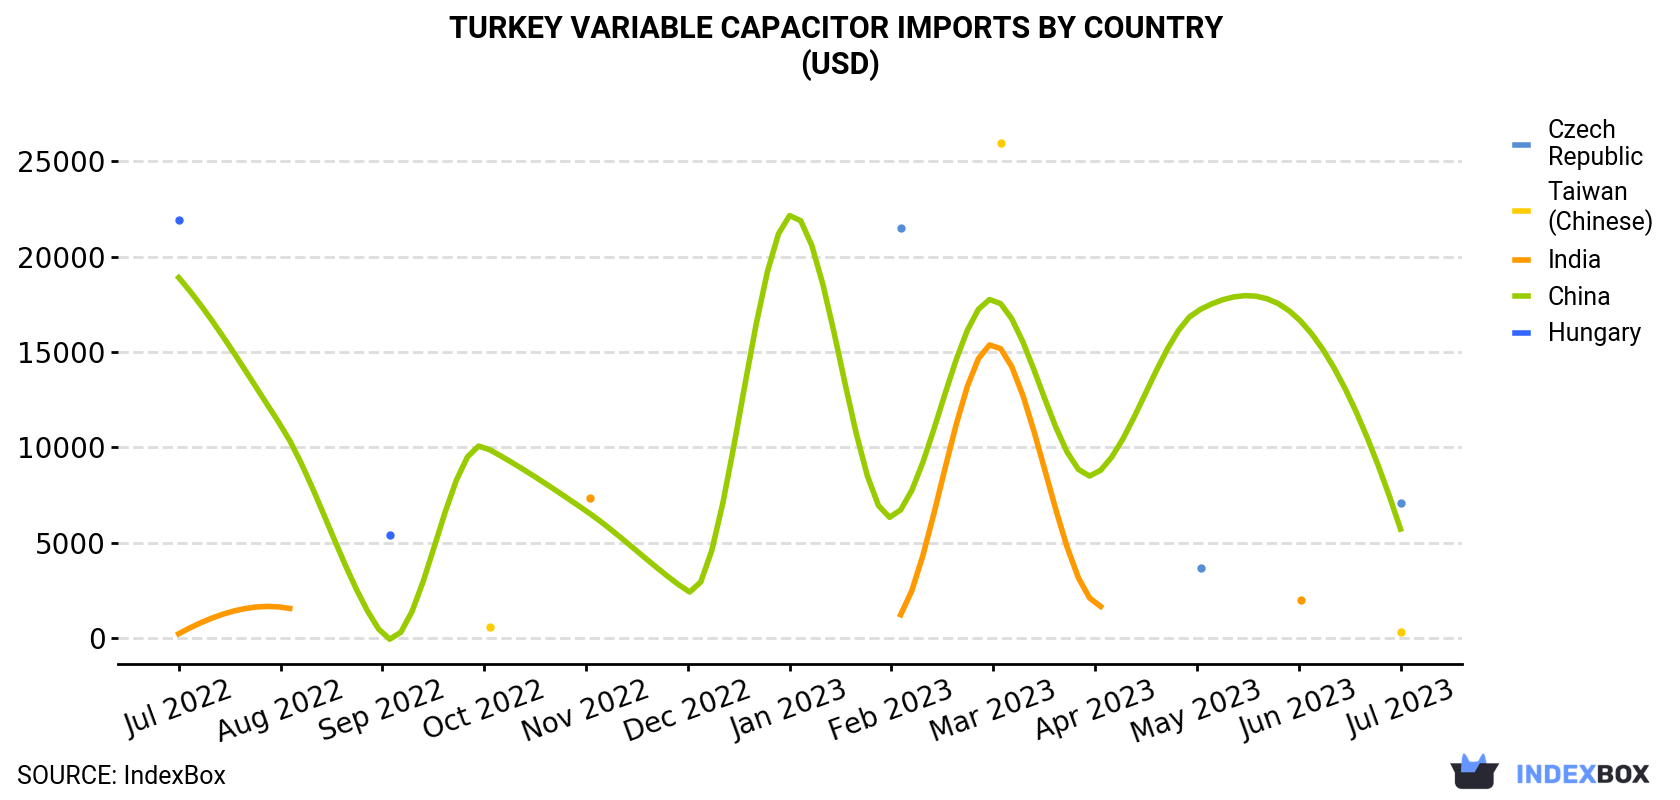 Turkey Variable Capacitor Imports By Country (USD)